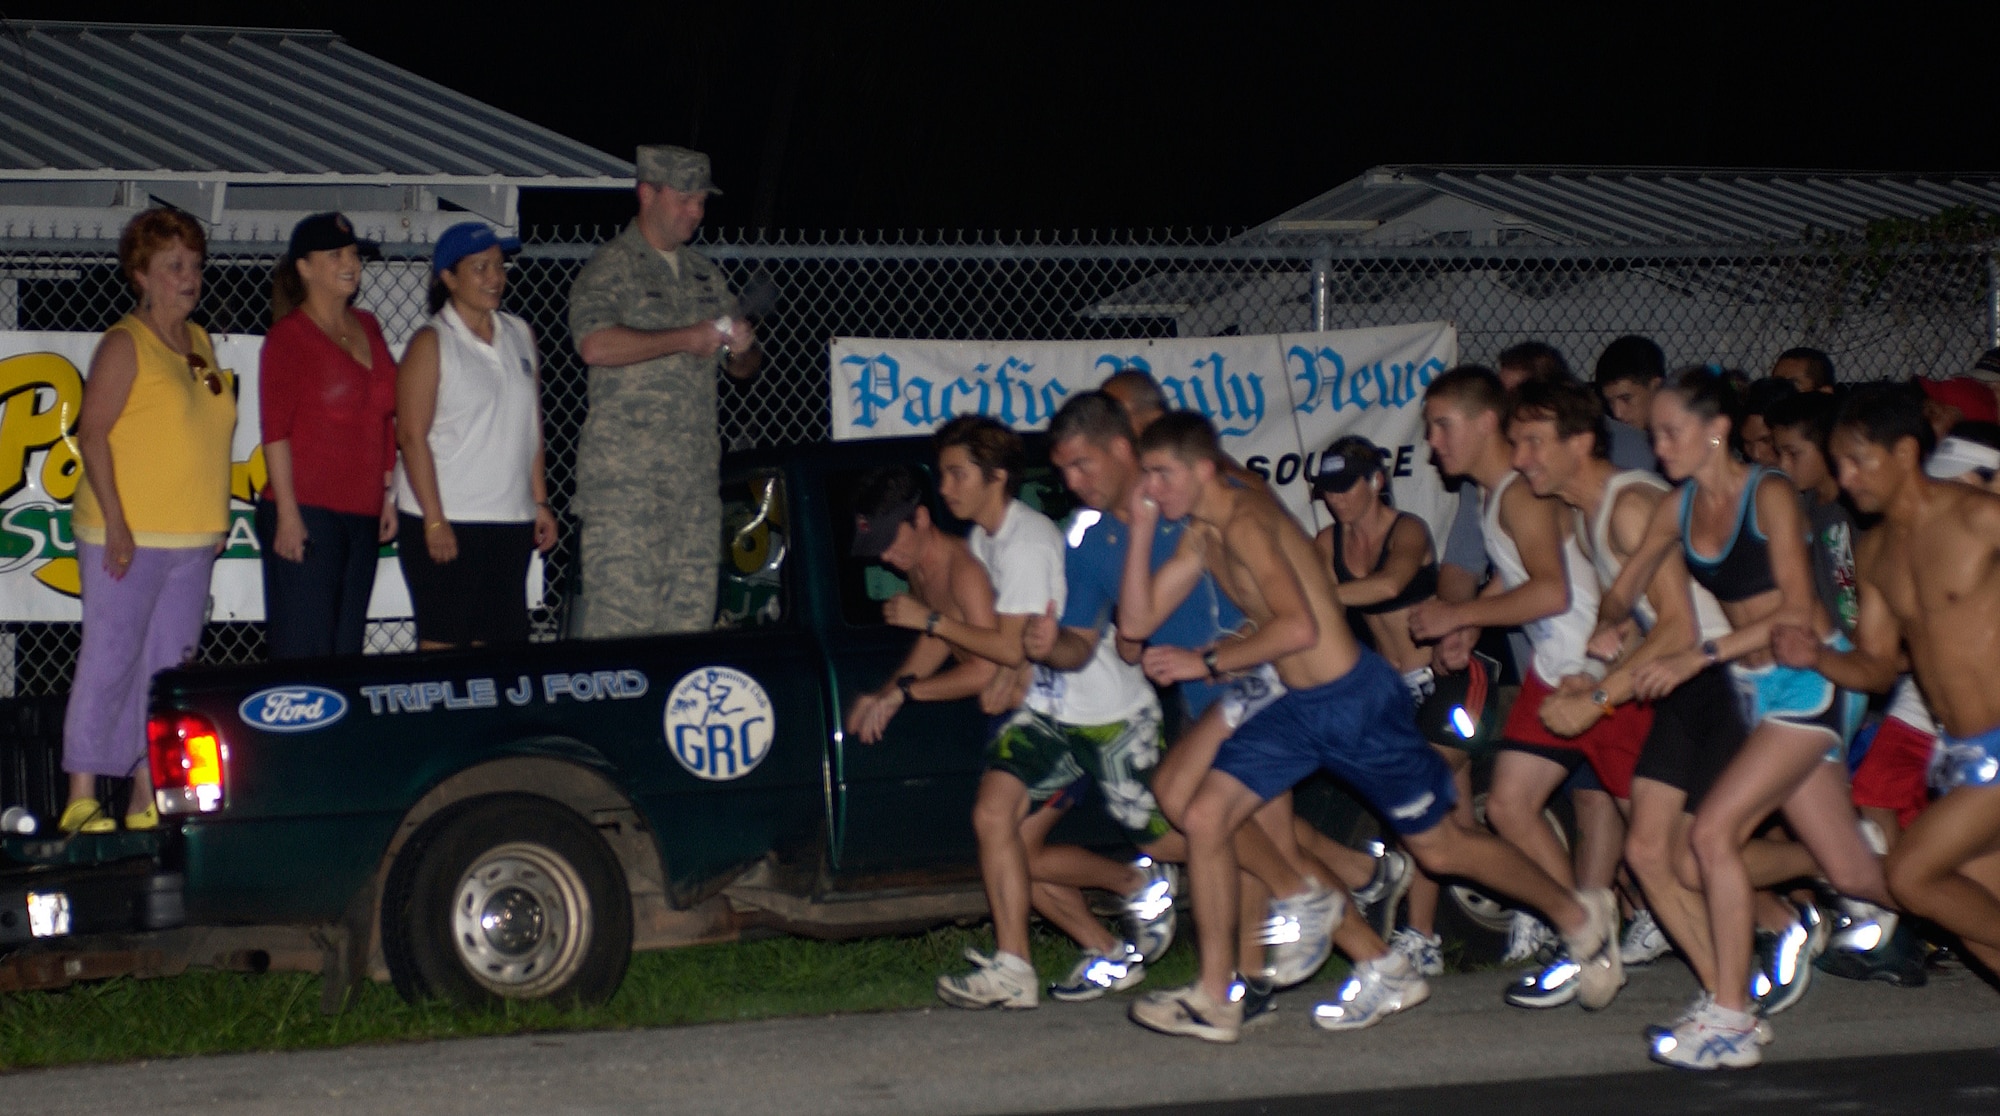 Brig. Gen. Doug Owens, 36th Wing commander, sounds the horn to begin the 2007 Run for Our Heroes 5K Run/Walk Dec. 8 at the United Seaman's Service in Piti, Guam. (U.S. Air Force photo/Senior Airman Angelique Smythe)